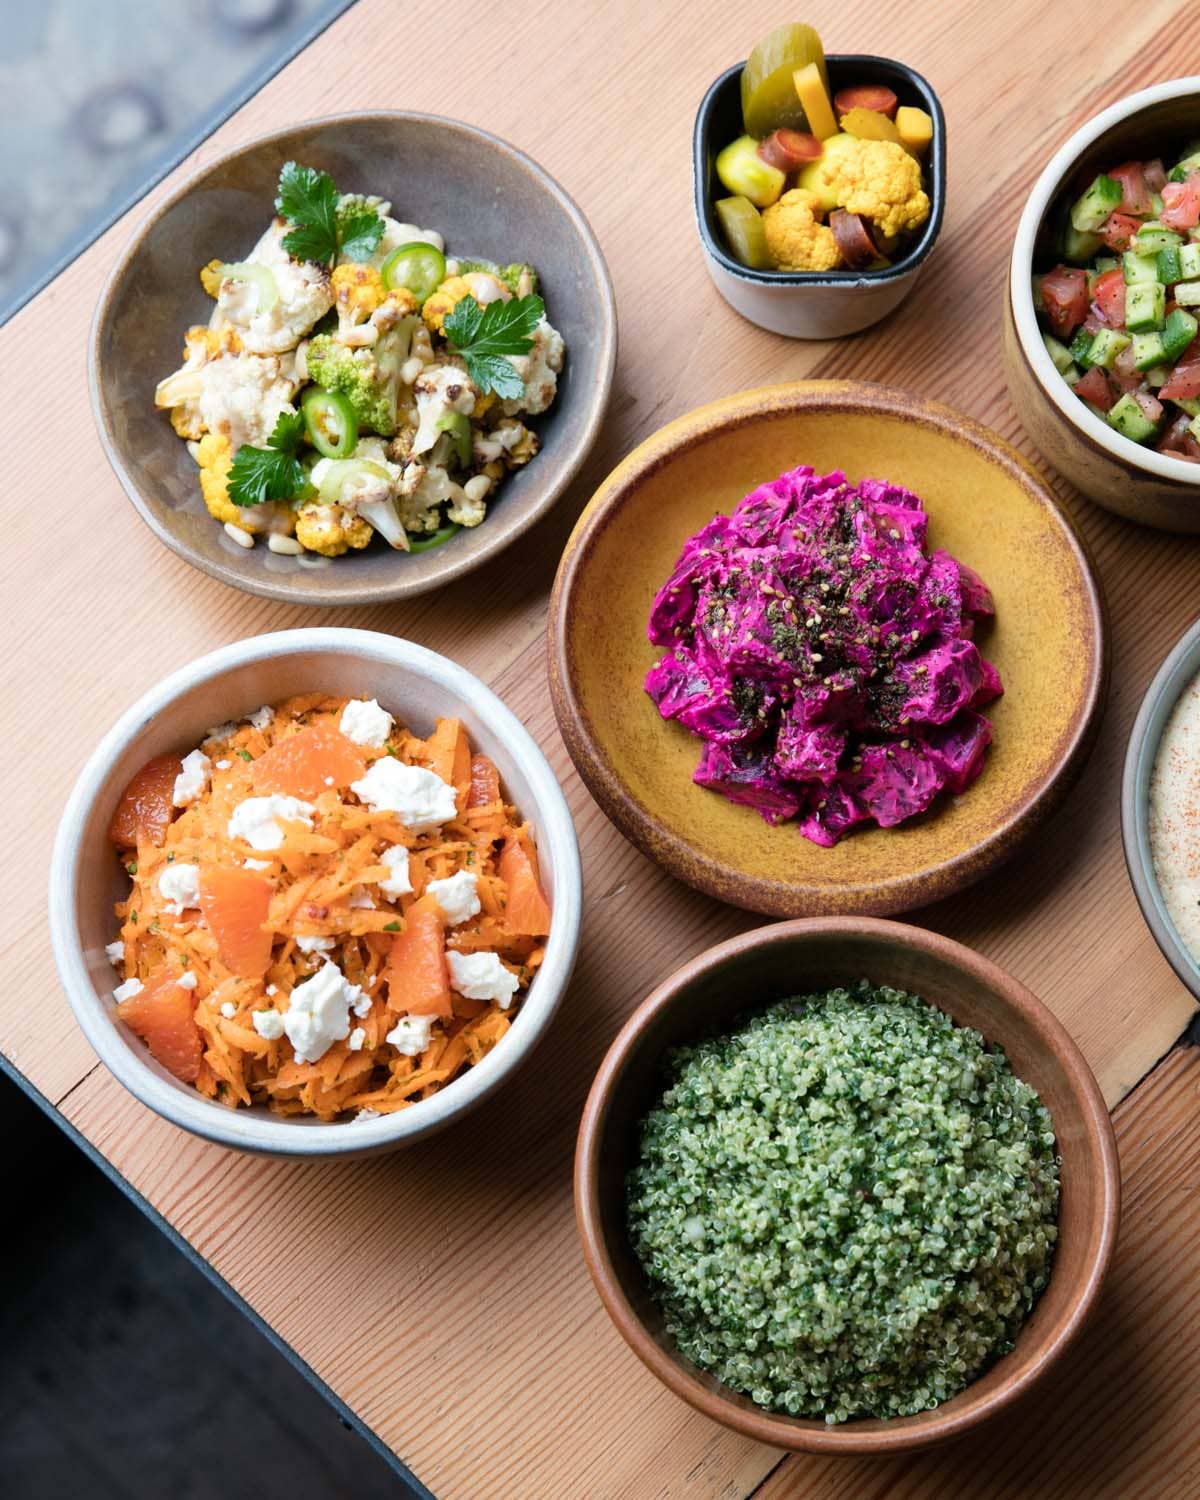 Top-Notch Middle Eastern Food Finally Hits the Bay Area